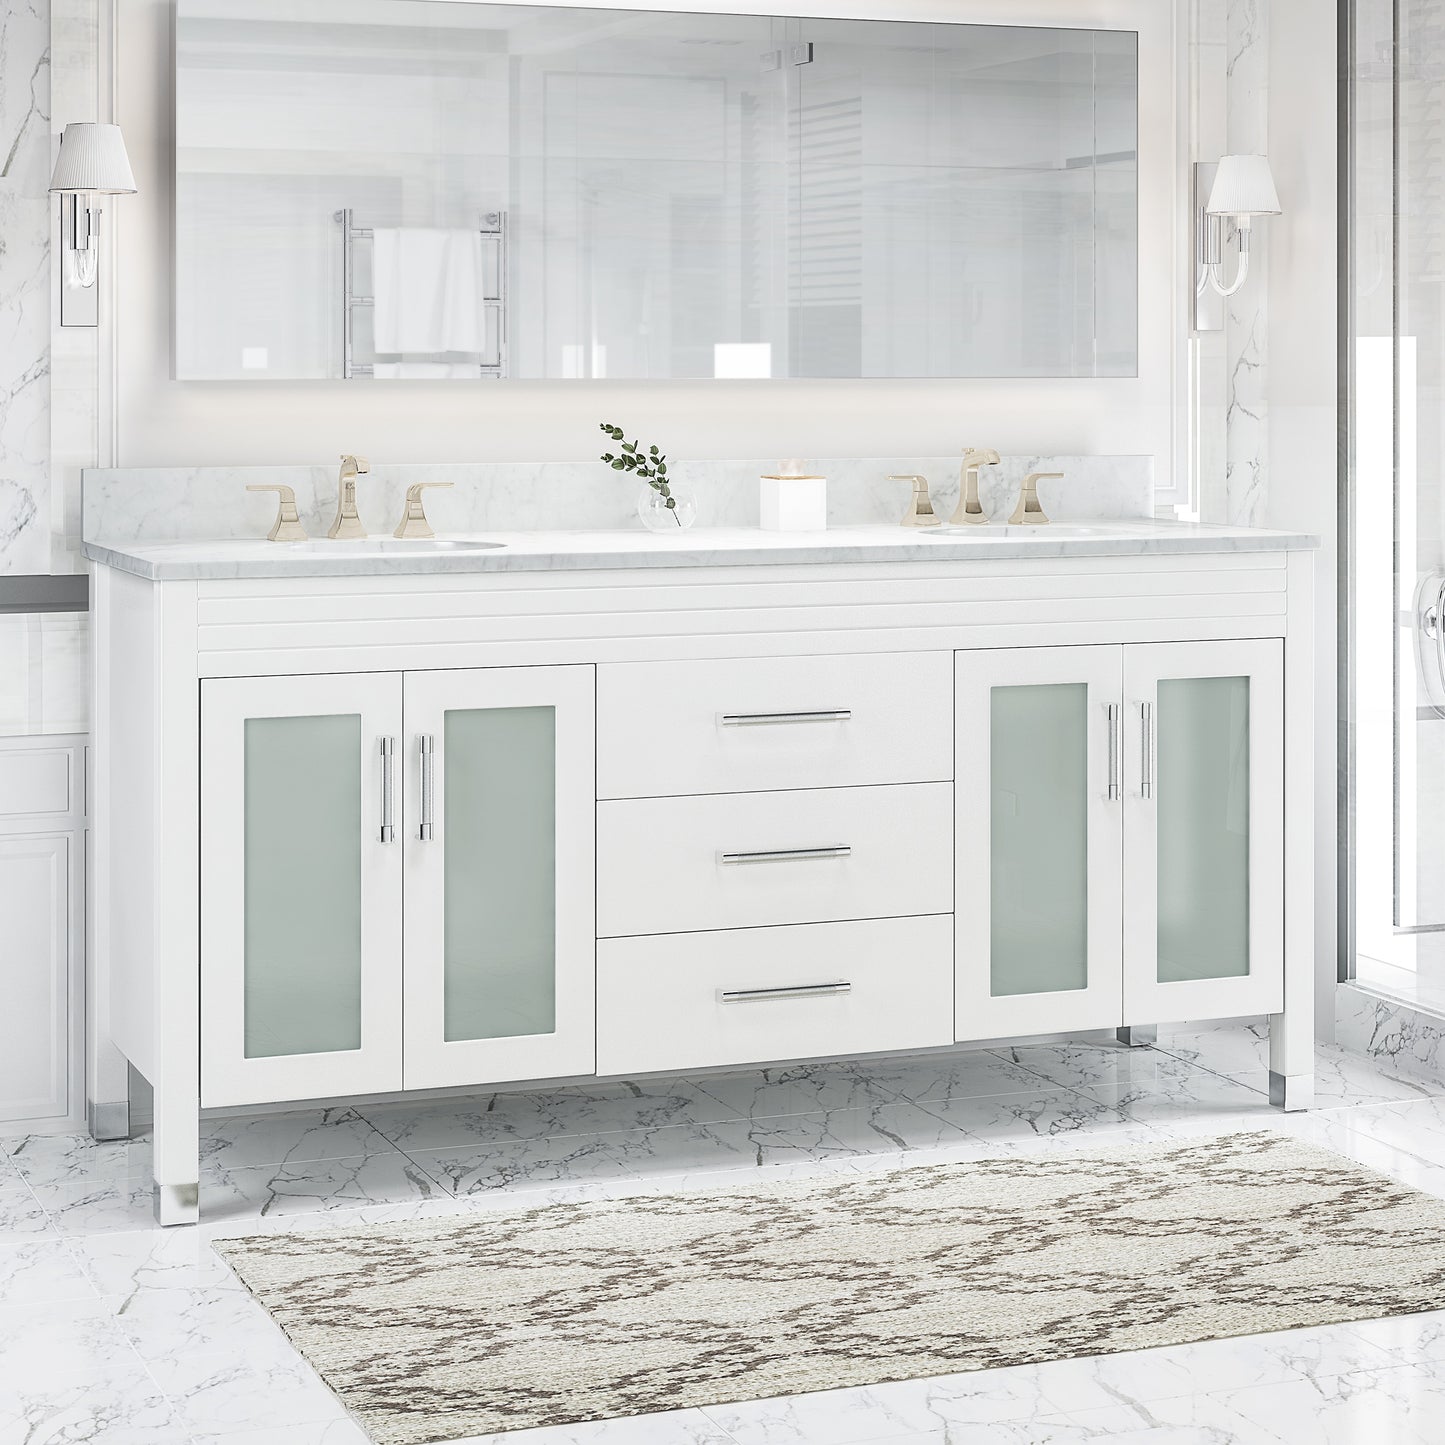 Holdame Contemporary 72" Wood Bathroom Vanity (Counter Top Not Included)